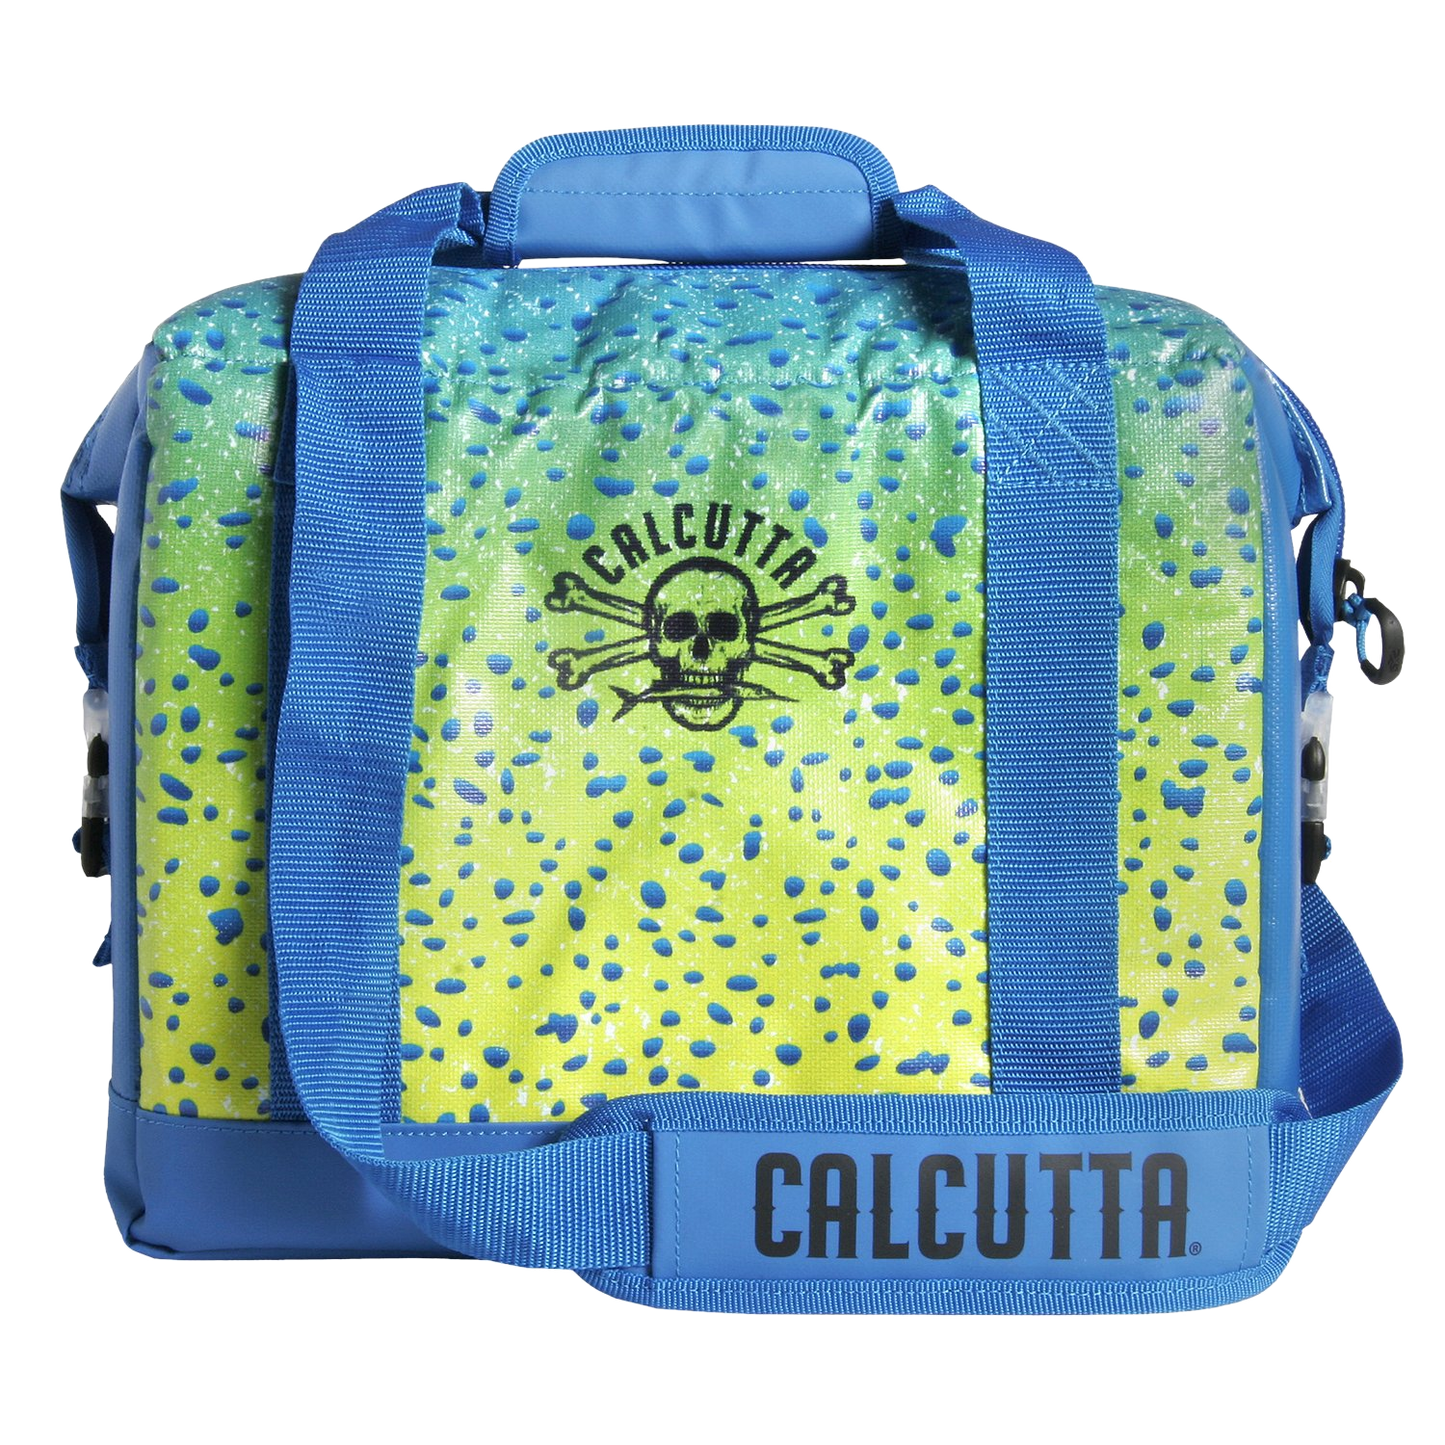 Calcutta Soft-Sided Cooler 12 Can Carry Strap